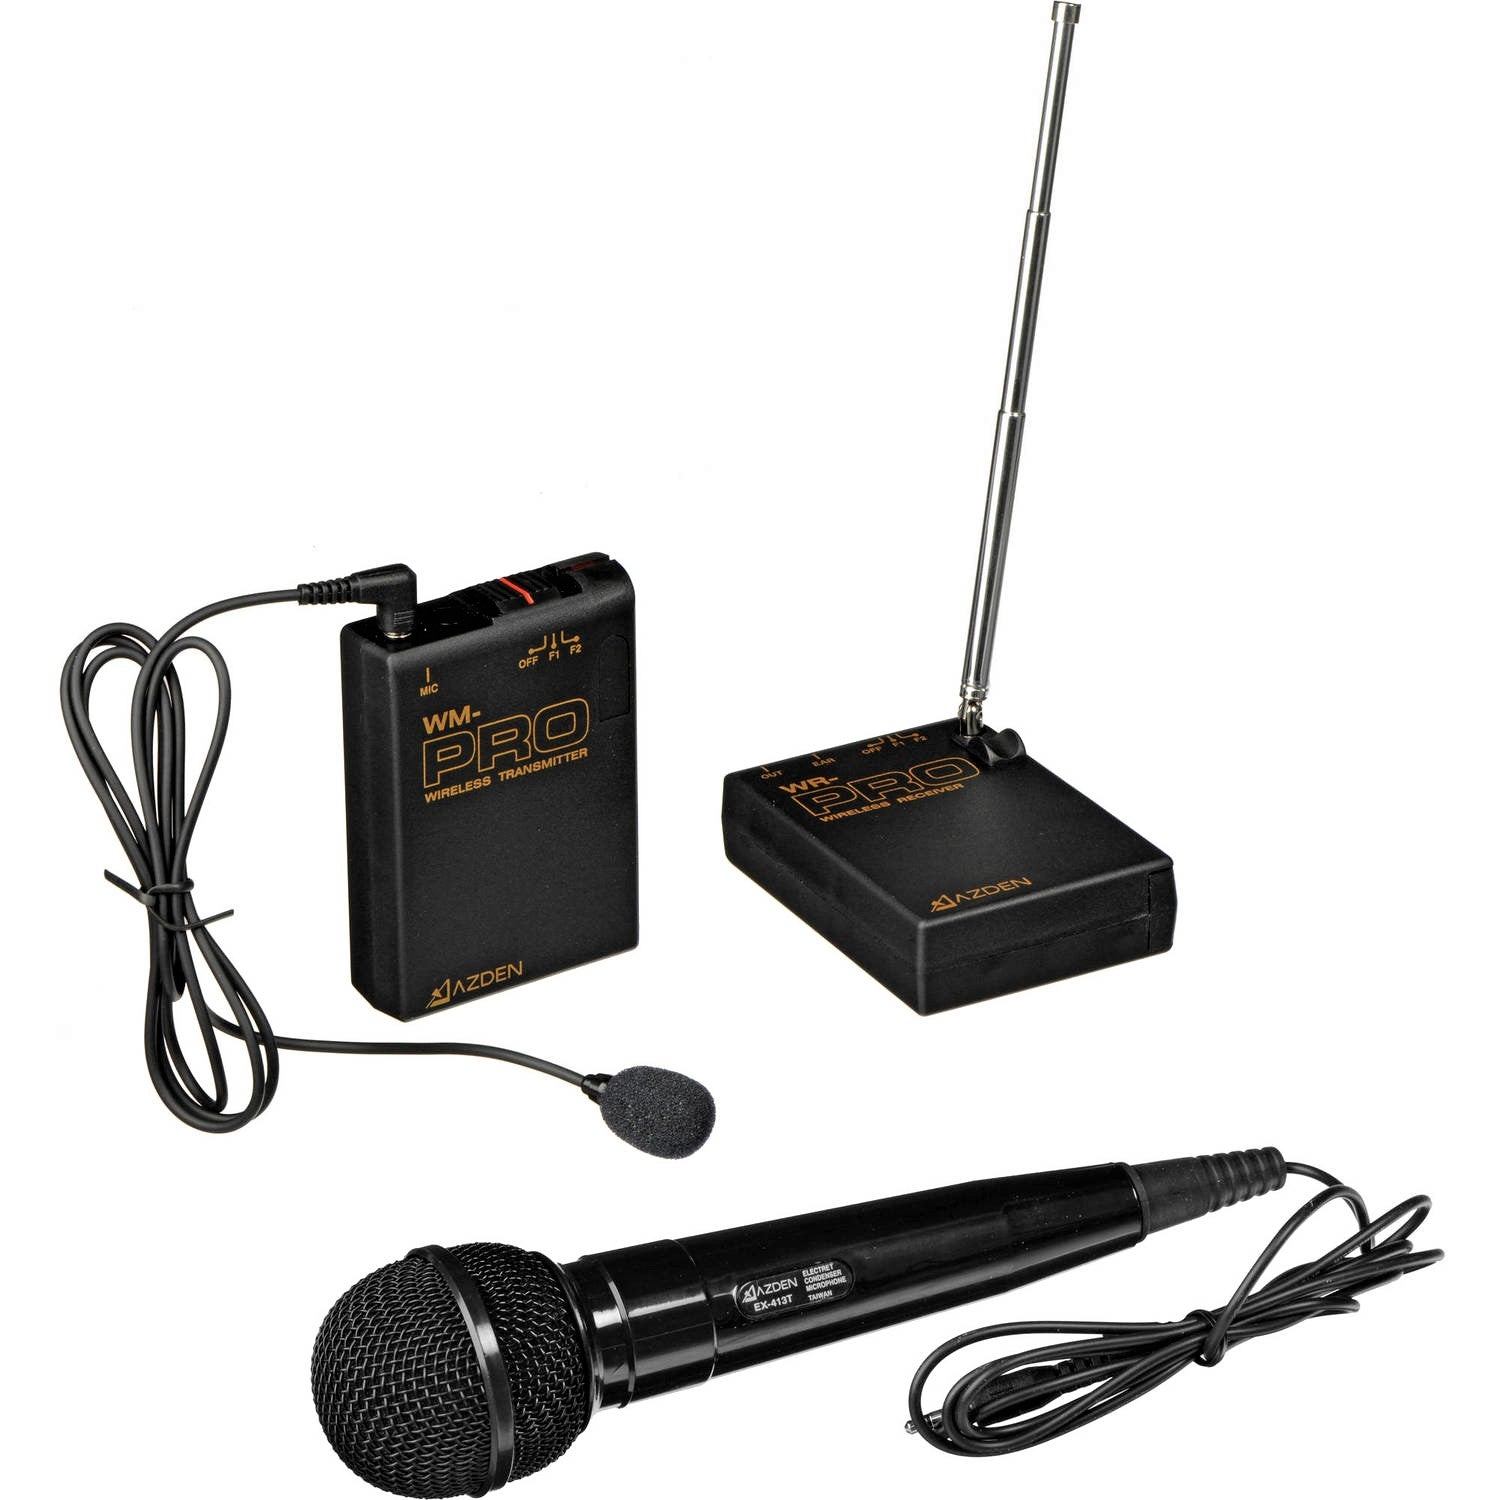 Azden Bodypack Transmitter and Wireless Receiver with Omni Lavalier Mic and Handheld Mic (169 & 170 MHz)